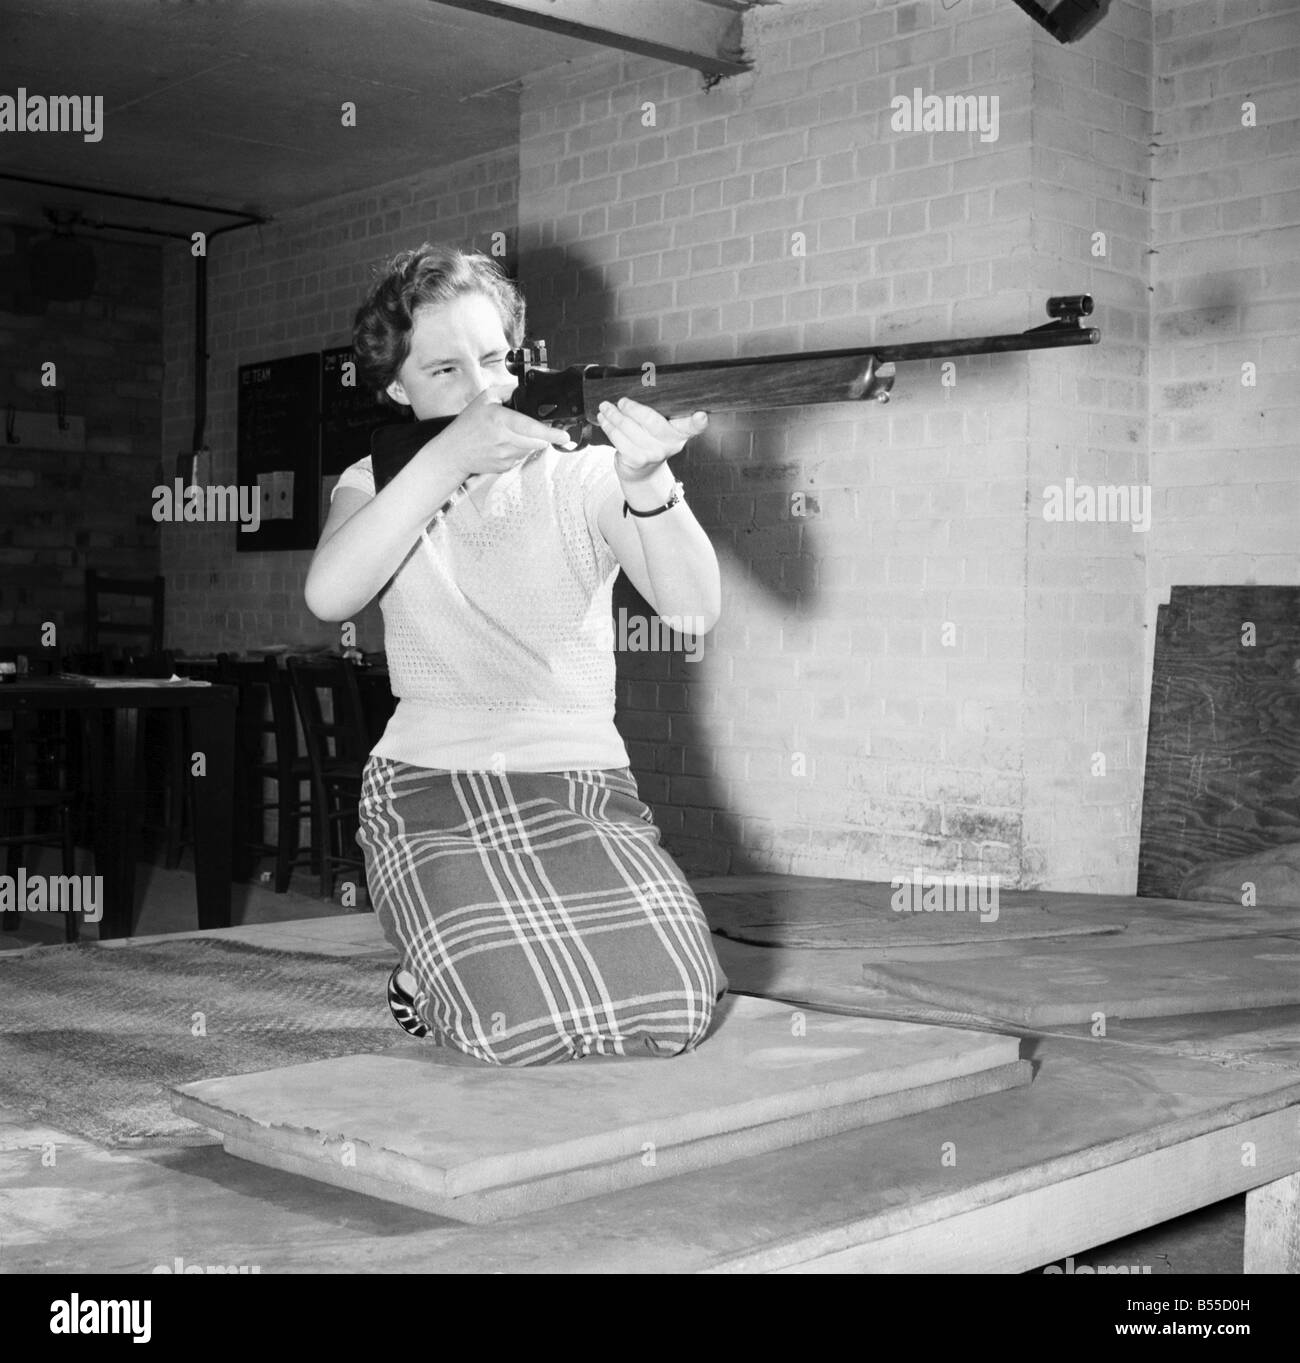 Woman with Rifle: Miss Mavis Felmingham, 17, the 'Annie Oakley' of the Sentinal Engineering works at Shrewsbury. Five months ago Mavis, a clerical worker, had never handled a gun. She has just won the Works Coronation Shield competed for by 53 members of the Rifle Club, including seasone County Championship contestants. She has now been selected to shoot in the works team which competes in the Shropshire League. October 1953 D6232 Stock Photo